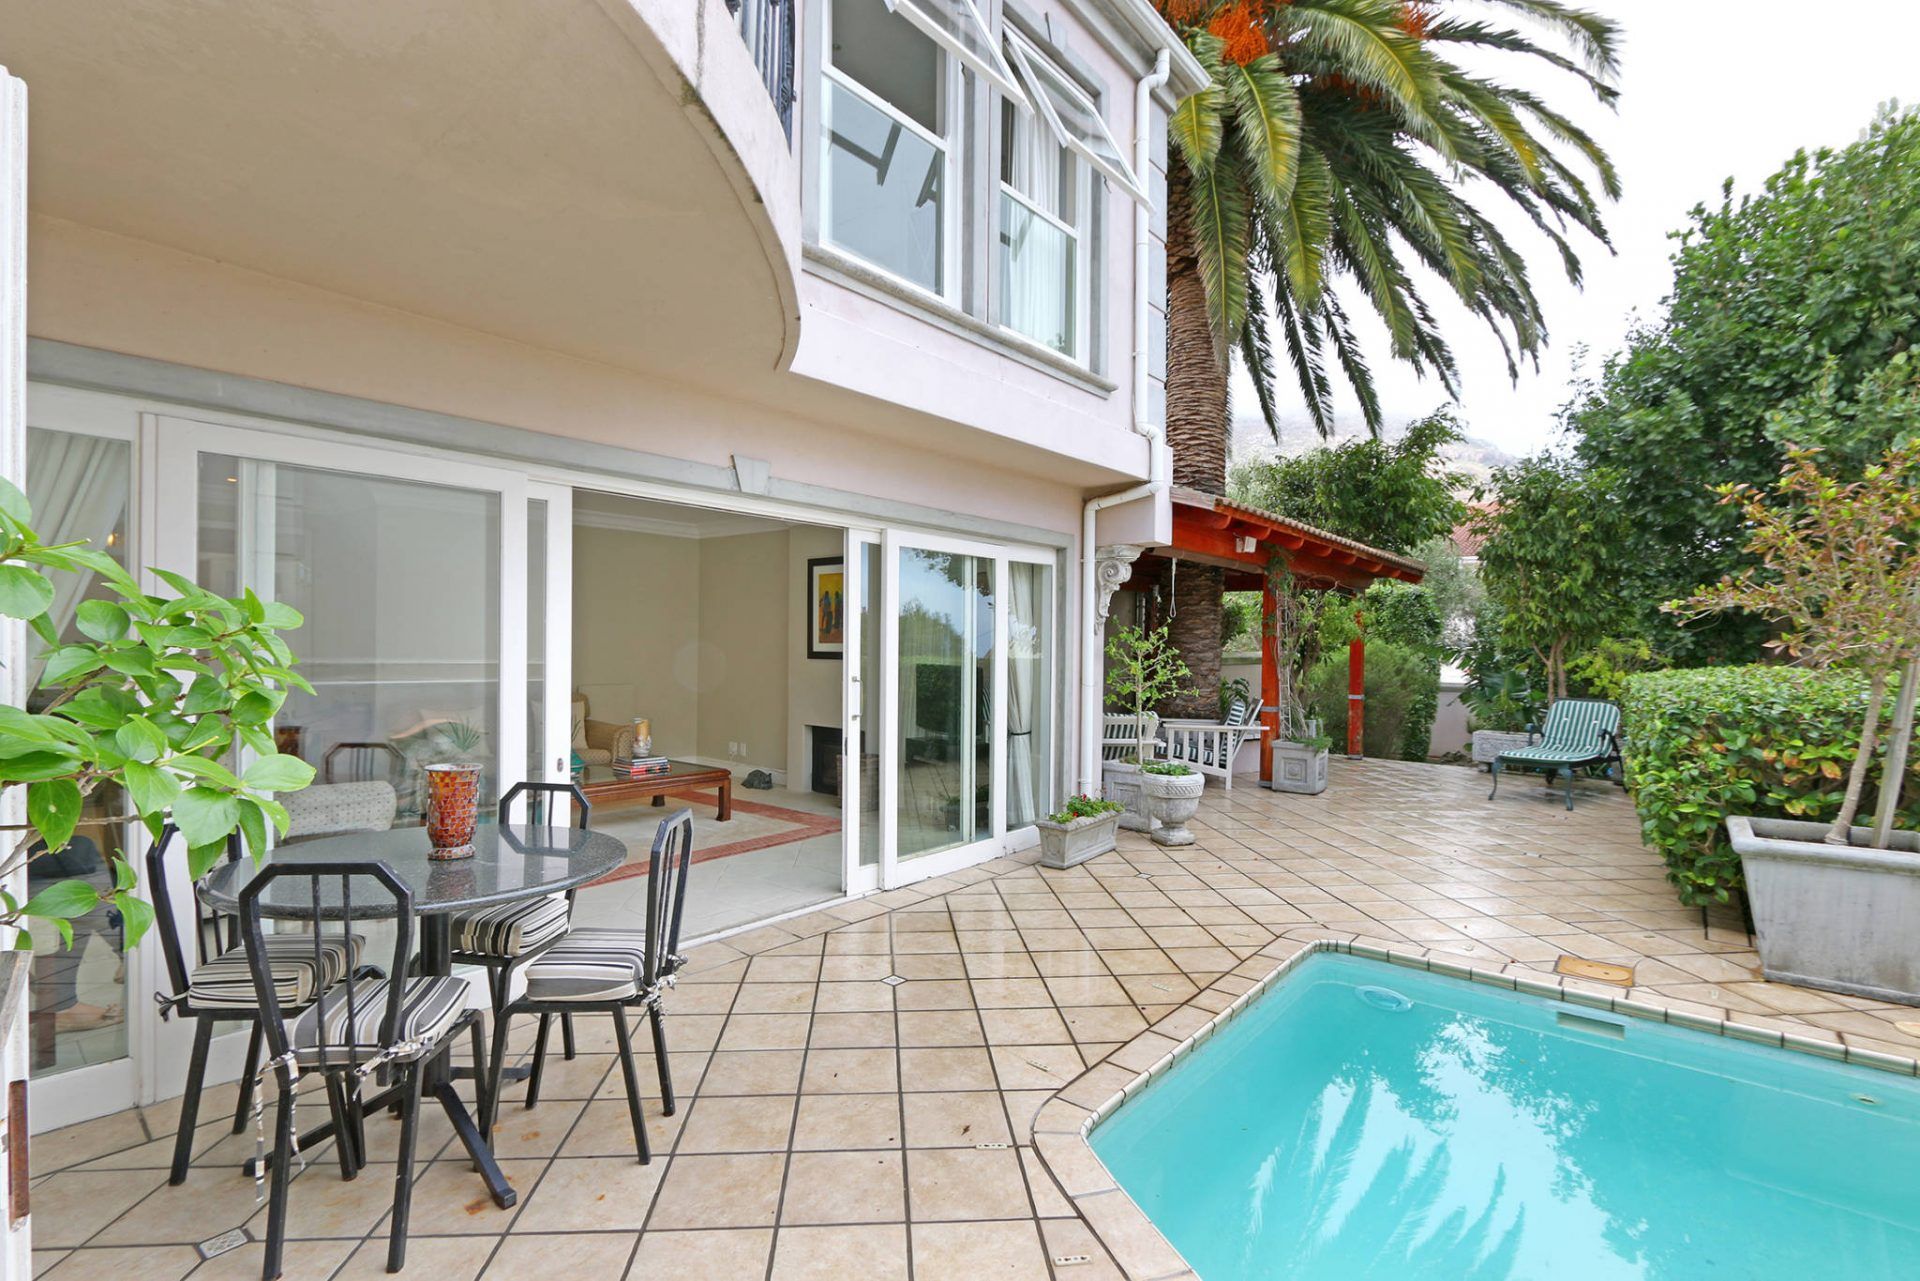 Photo 11 of King Street Villa accommodation in Hout Bay, Cape Town with 3 bedrooms and 2 bathrooms